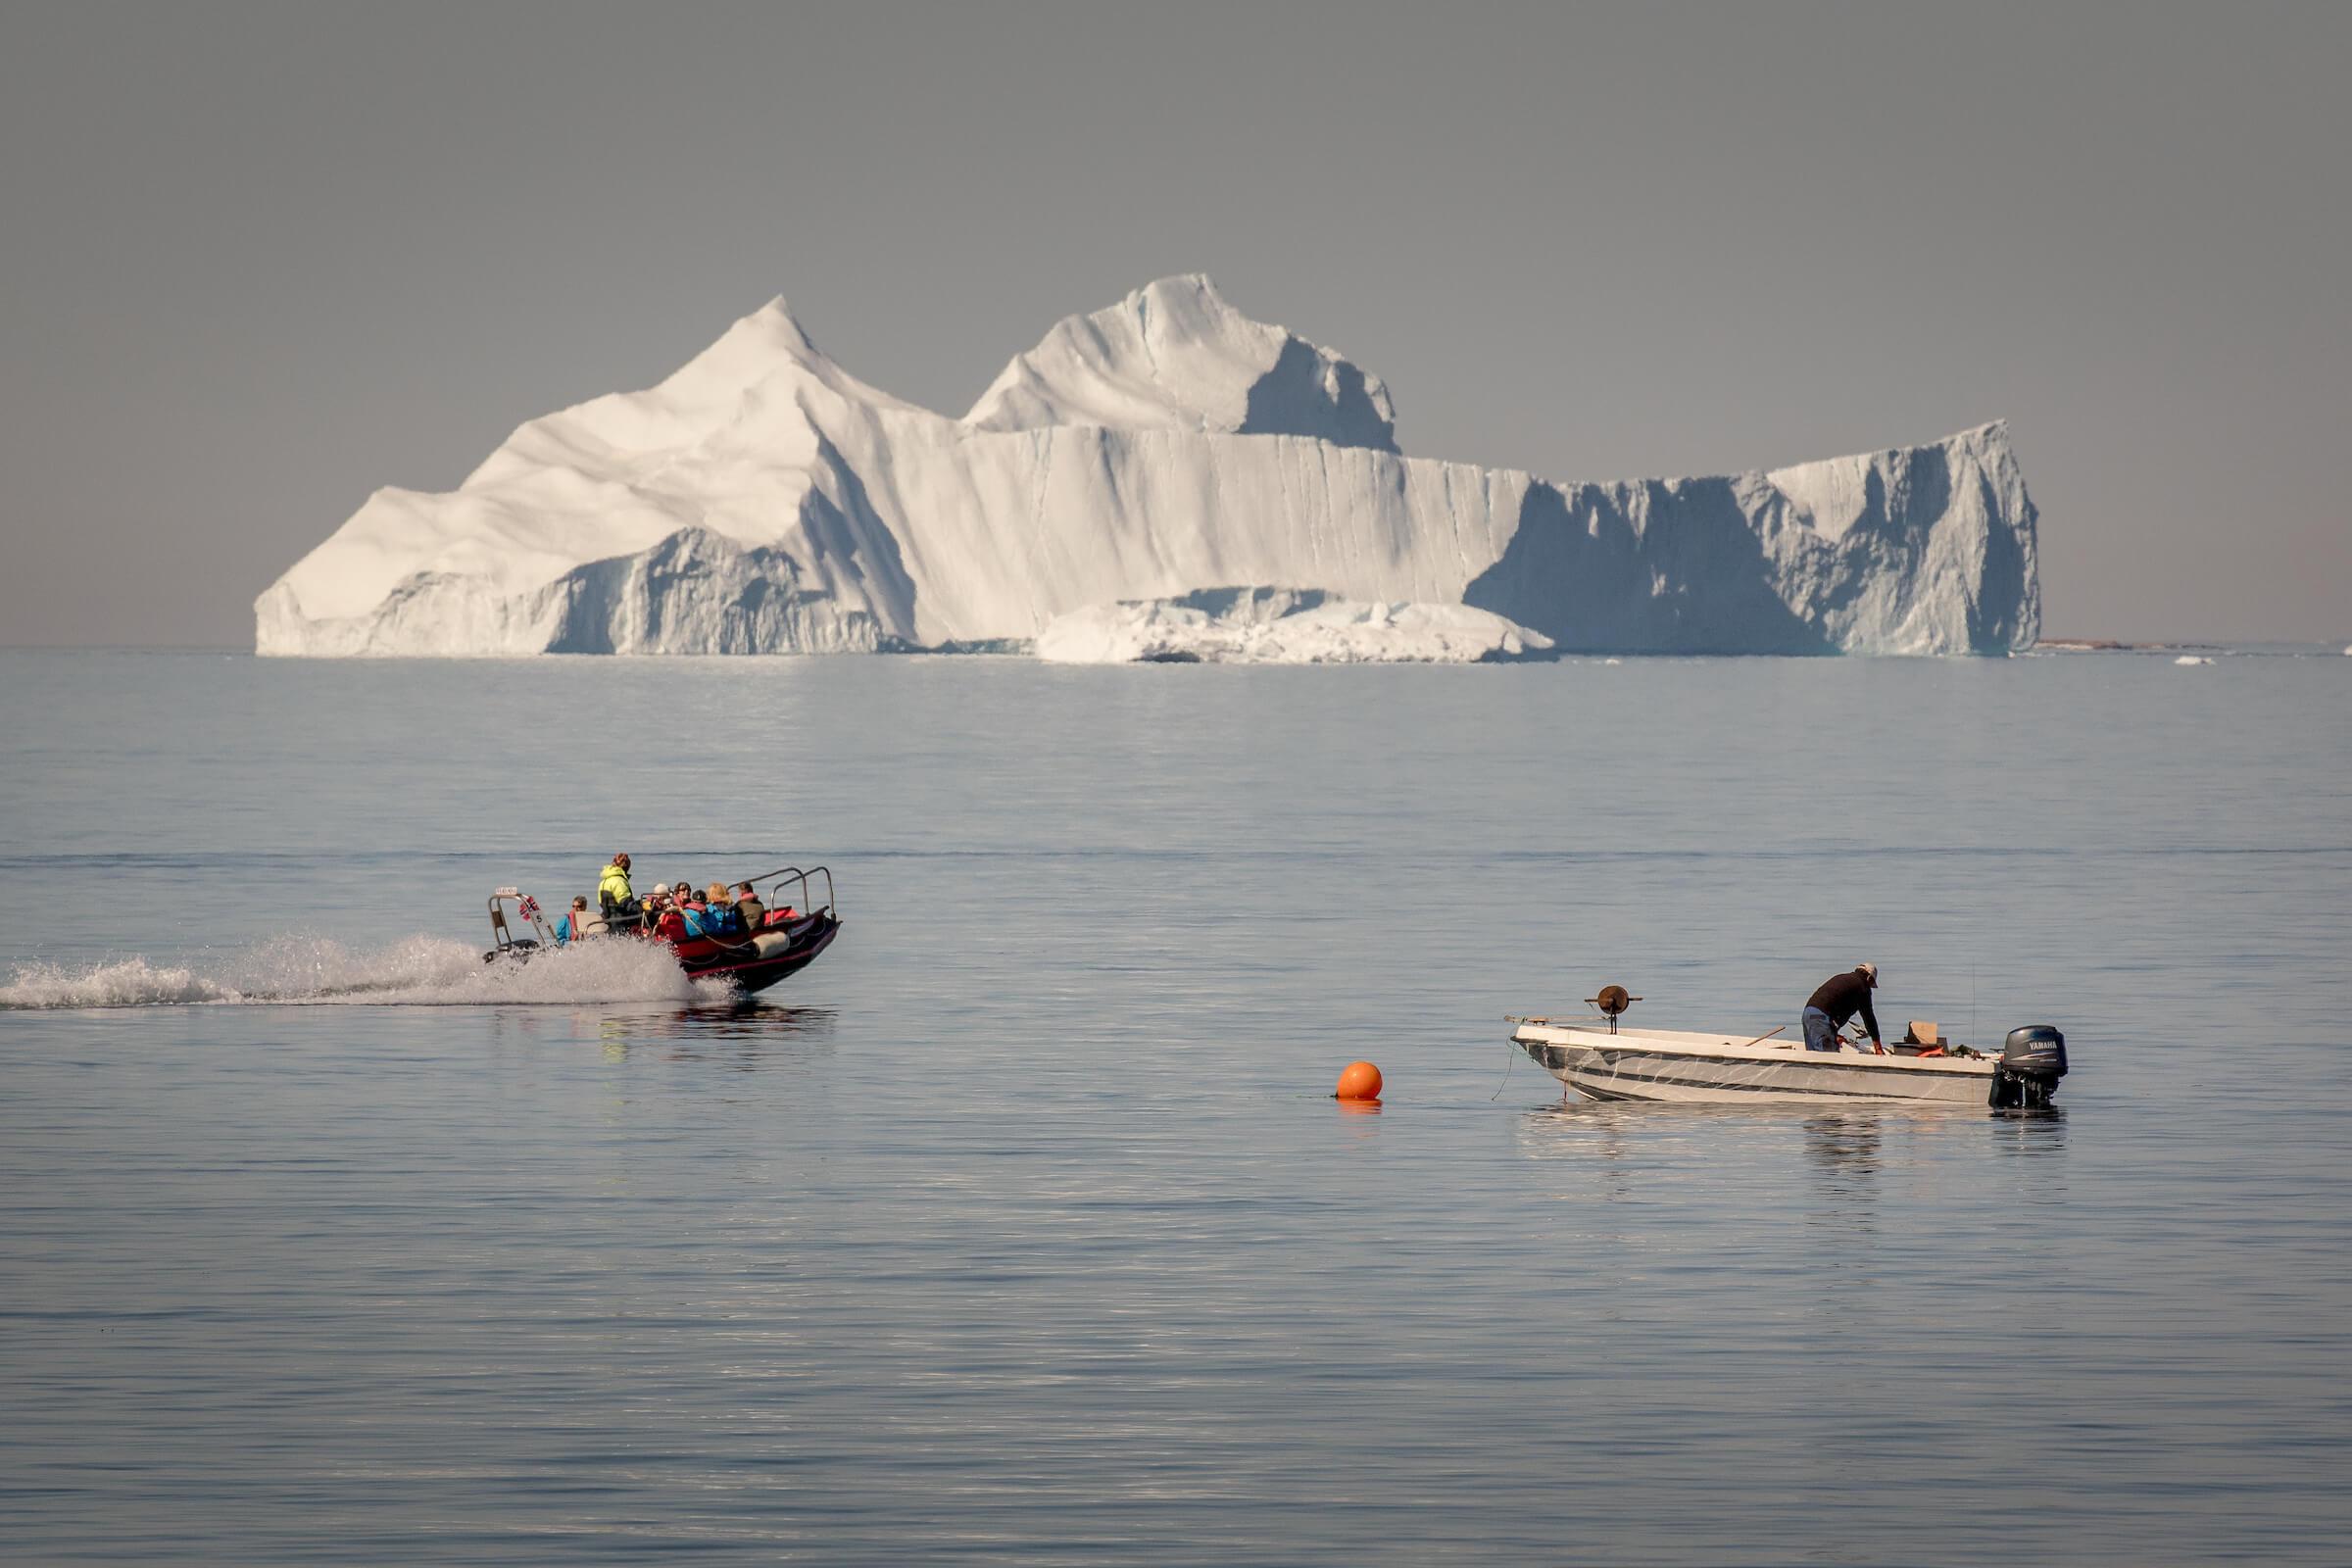 A tenderboat from MS Fram going past a fisherman at work in Upernavik in Greenland. By Mads Pihl